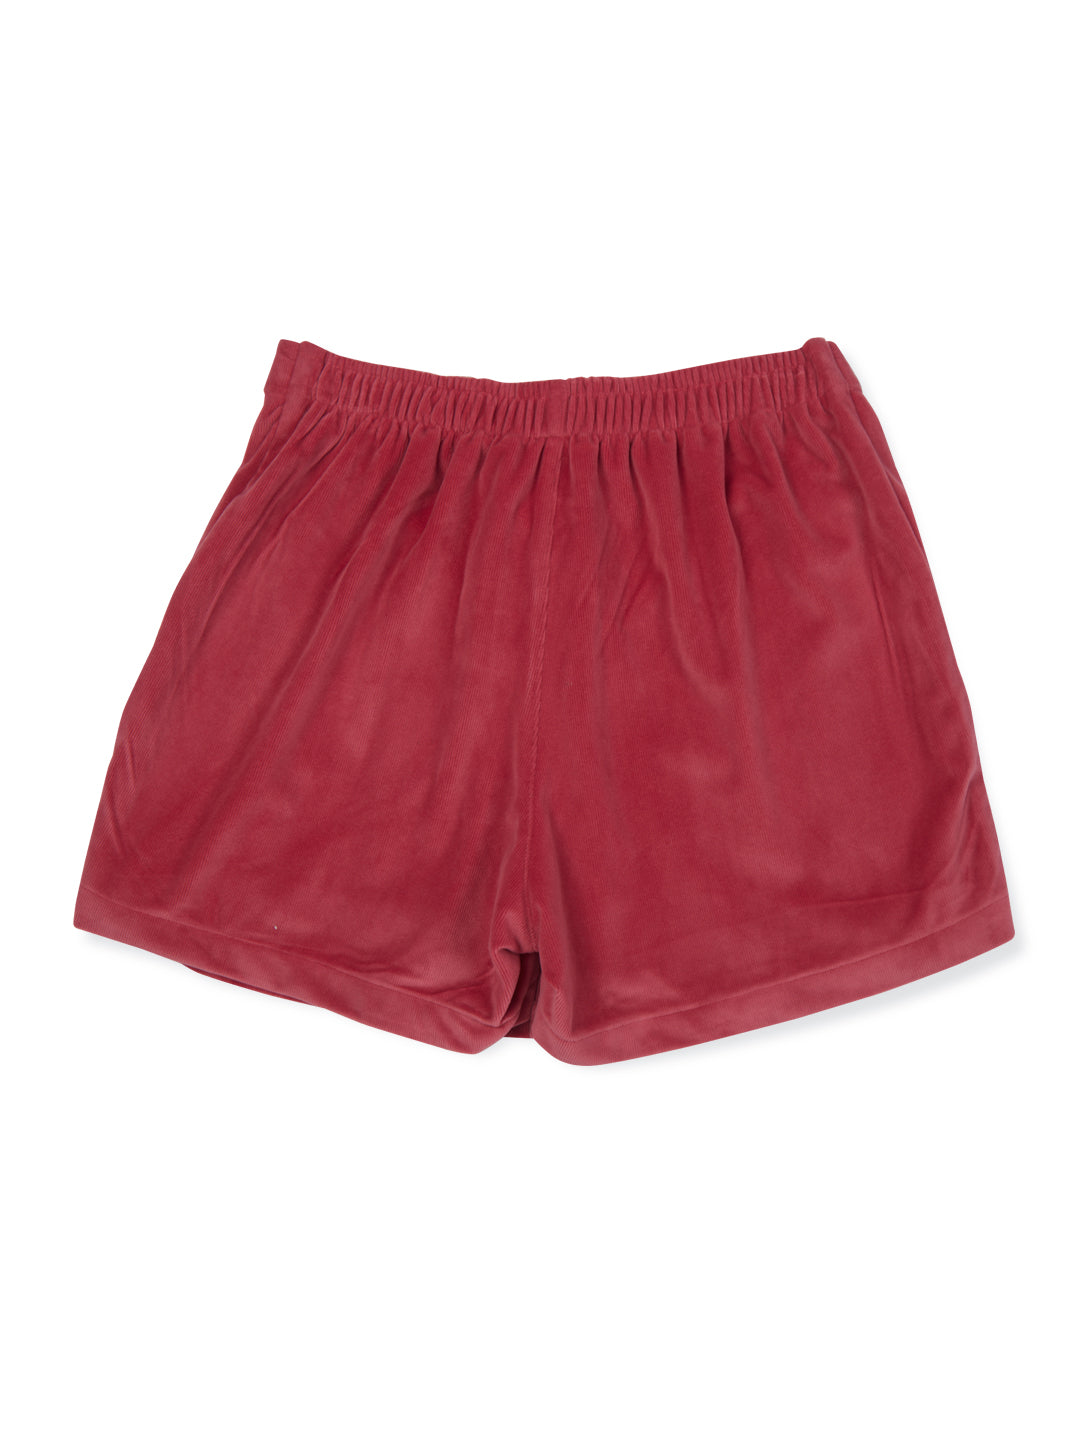 Girls pink woven pleated divided skirt